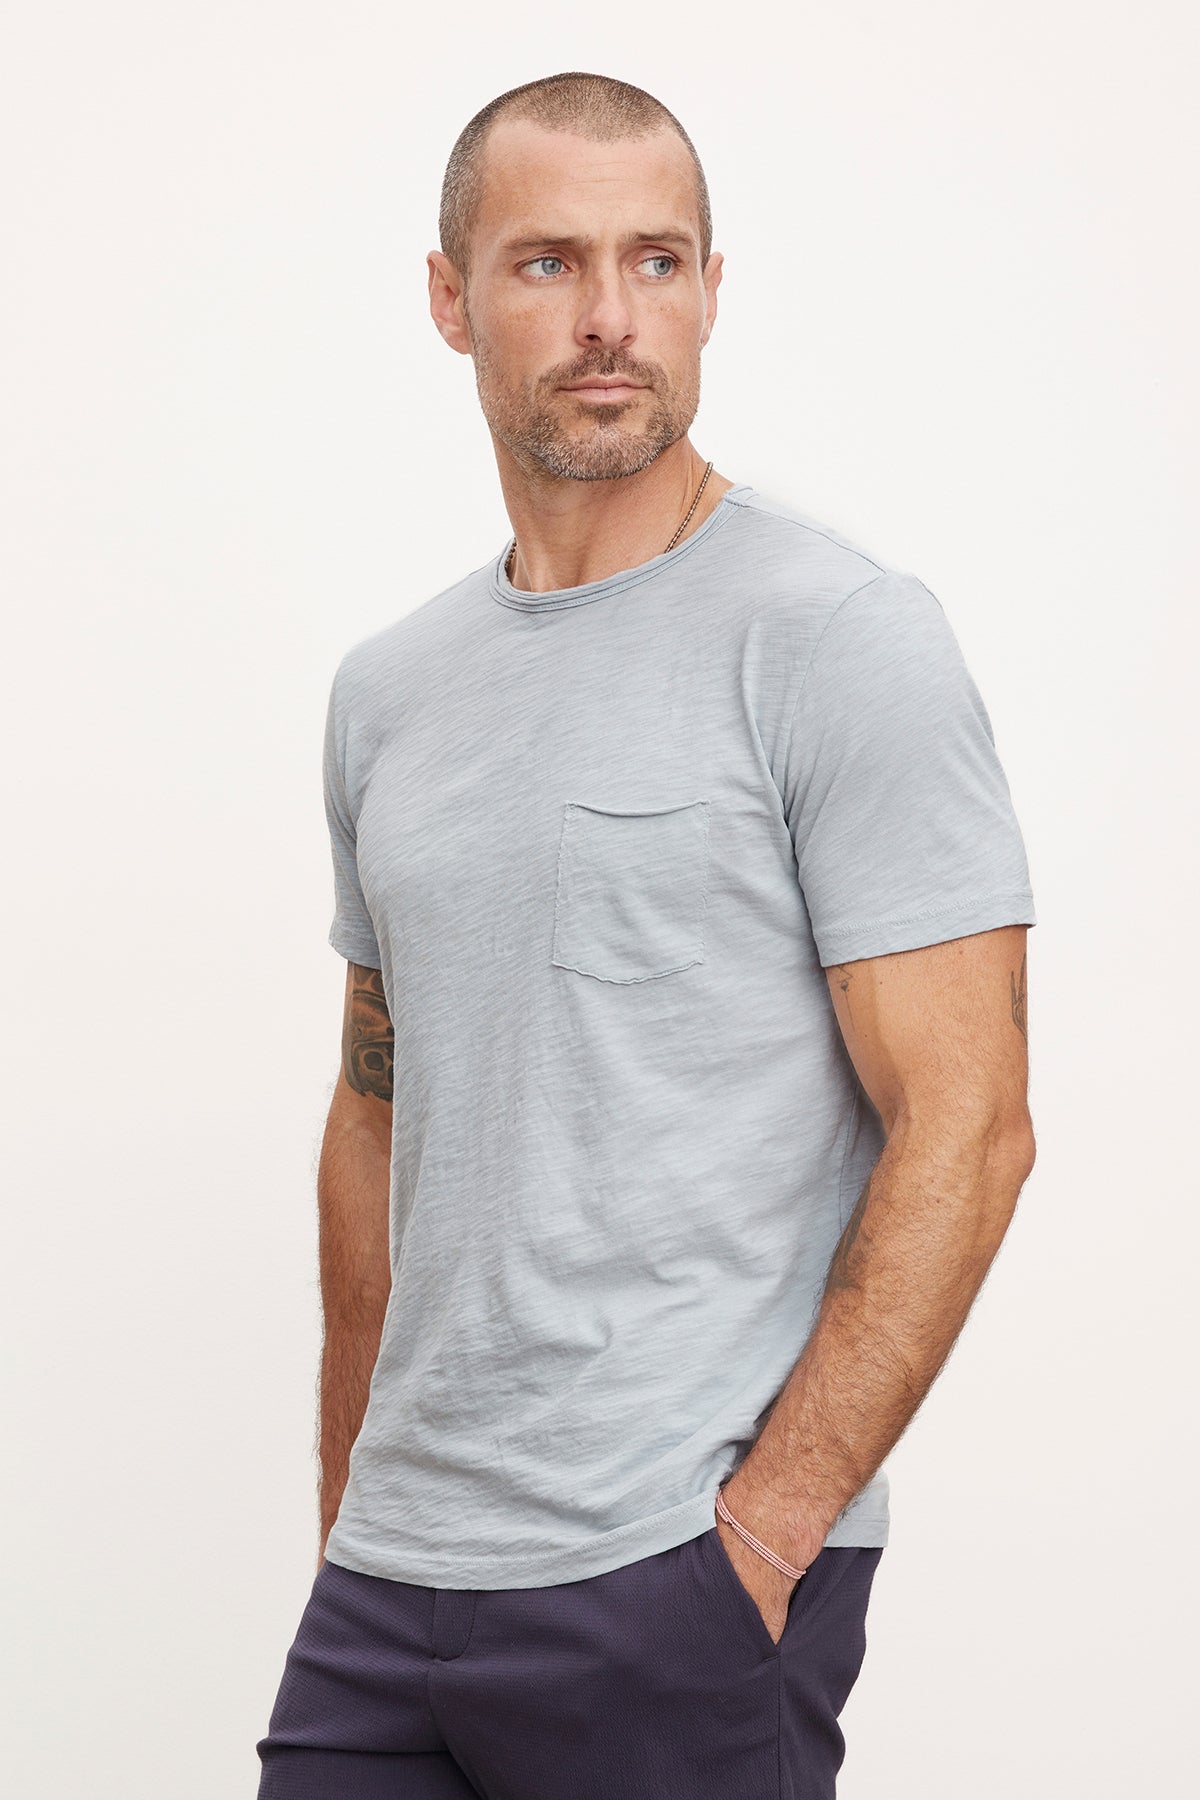 A man in a gray textured cotton slub CHAD TEE by Velvet by Graham & Spencer and dark pants standing against a white background, looking to the side with a serious expression.-36890799046849